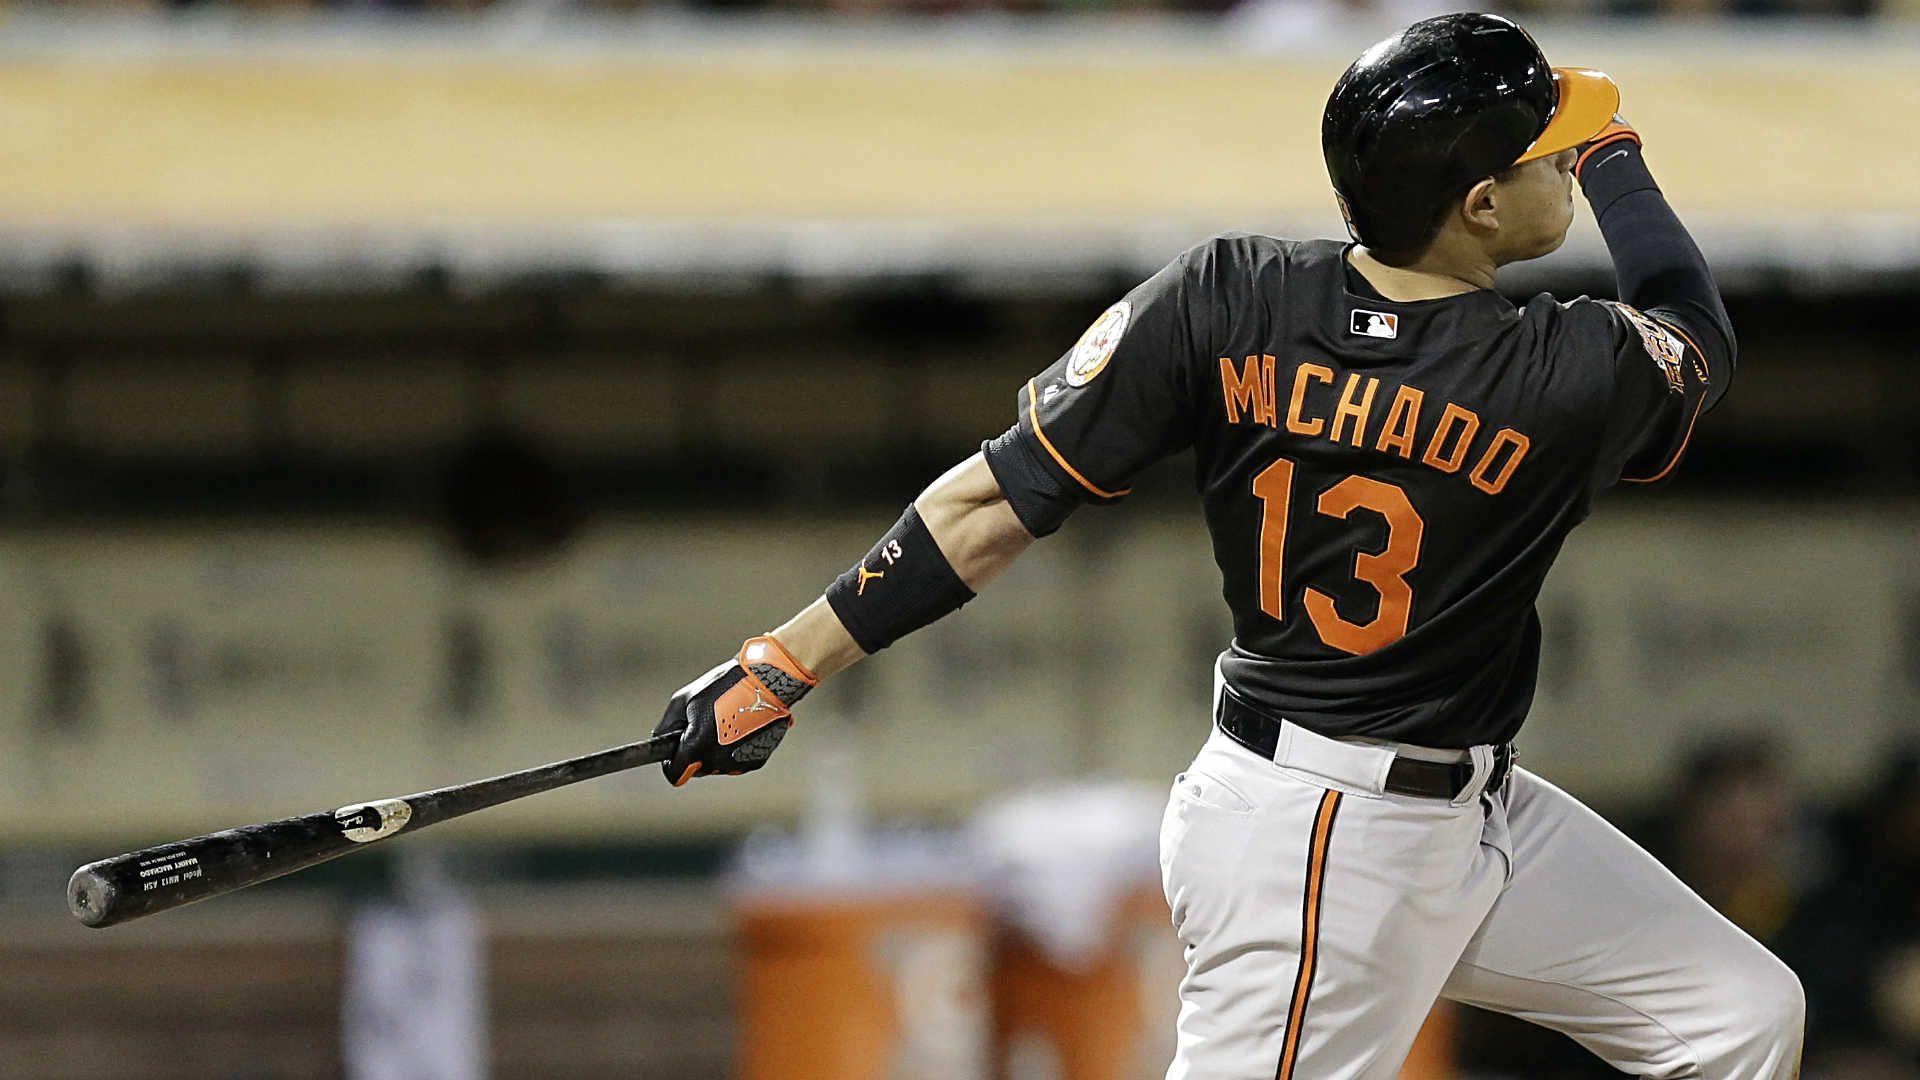 Oakland fans unload on Manny Machado, who answers with HR. MLB